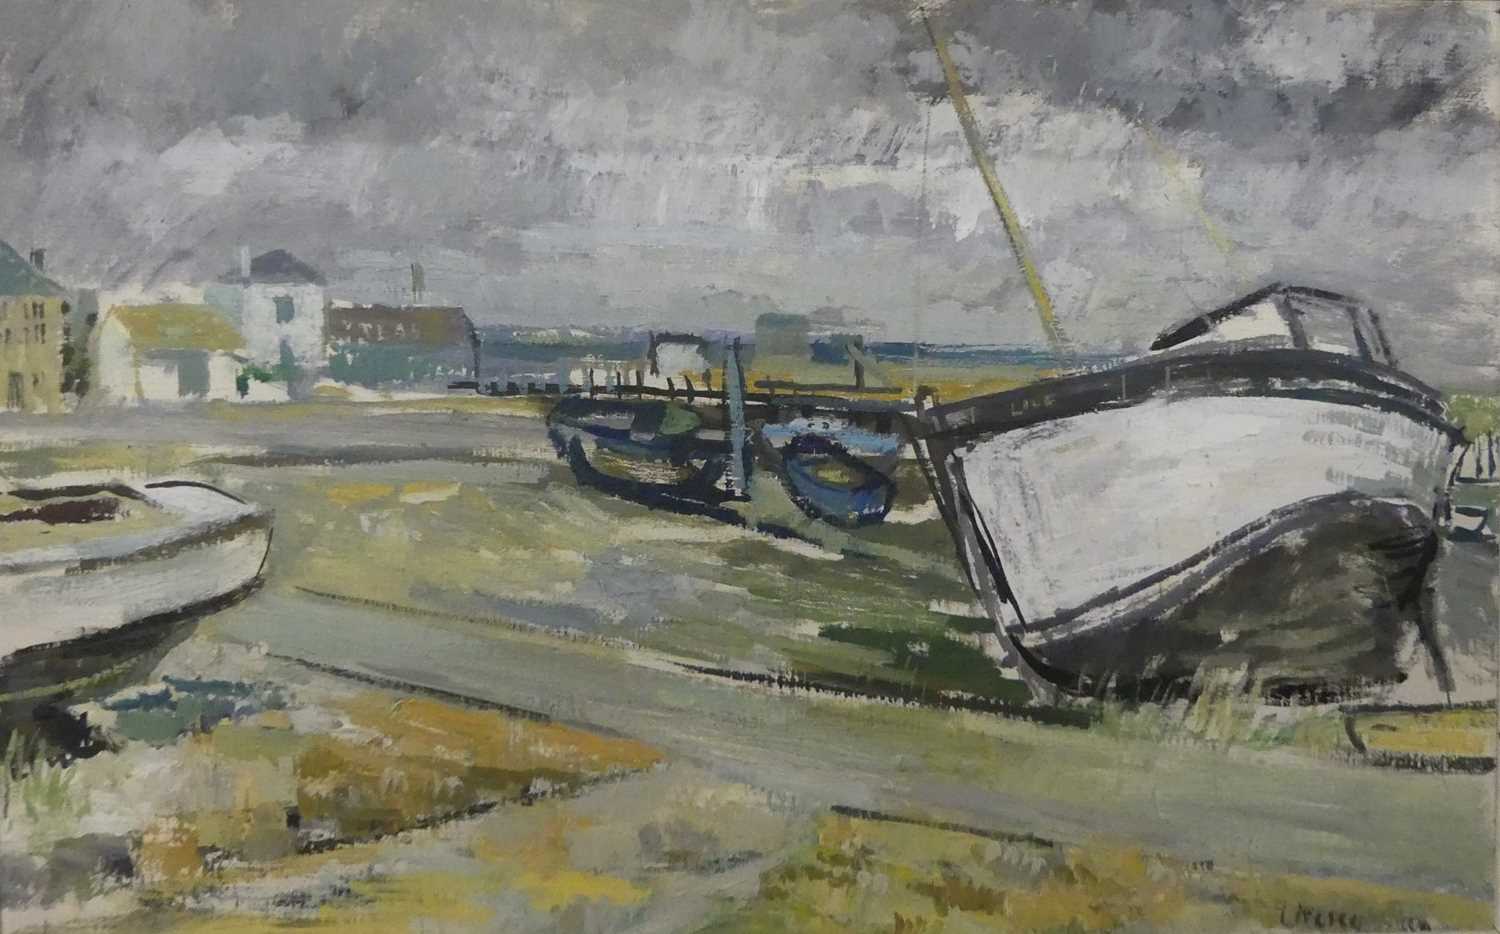 John Livesey (1926-1990) - The White Boat, Old Hastings, 1960, palette knife oil on board, signed